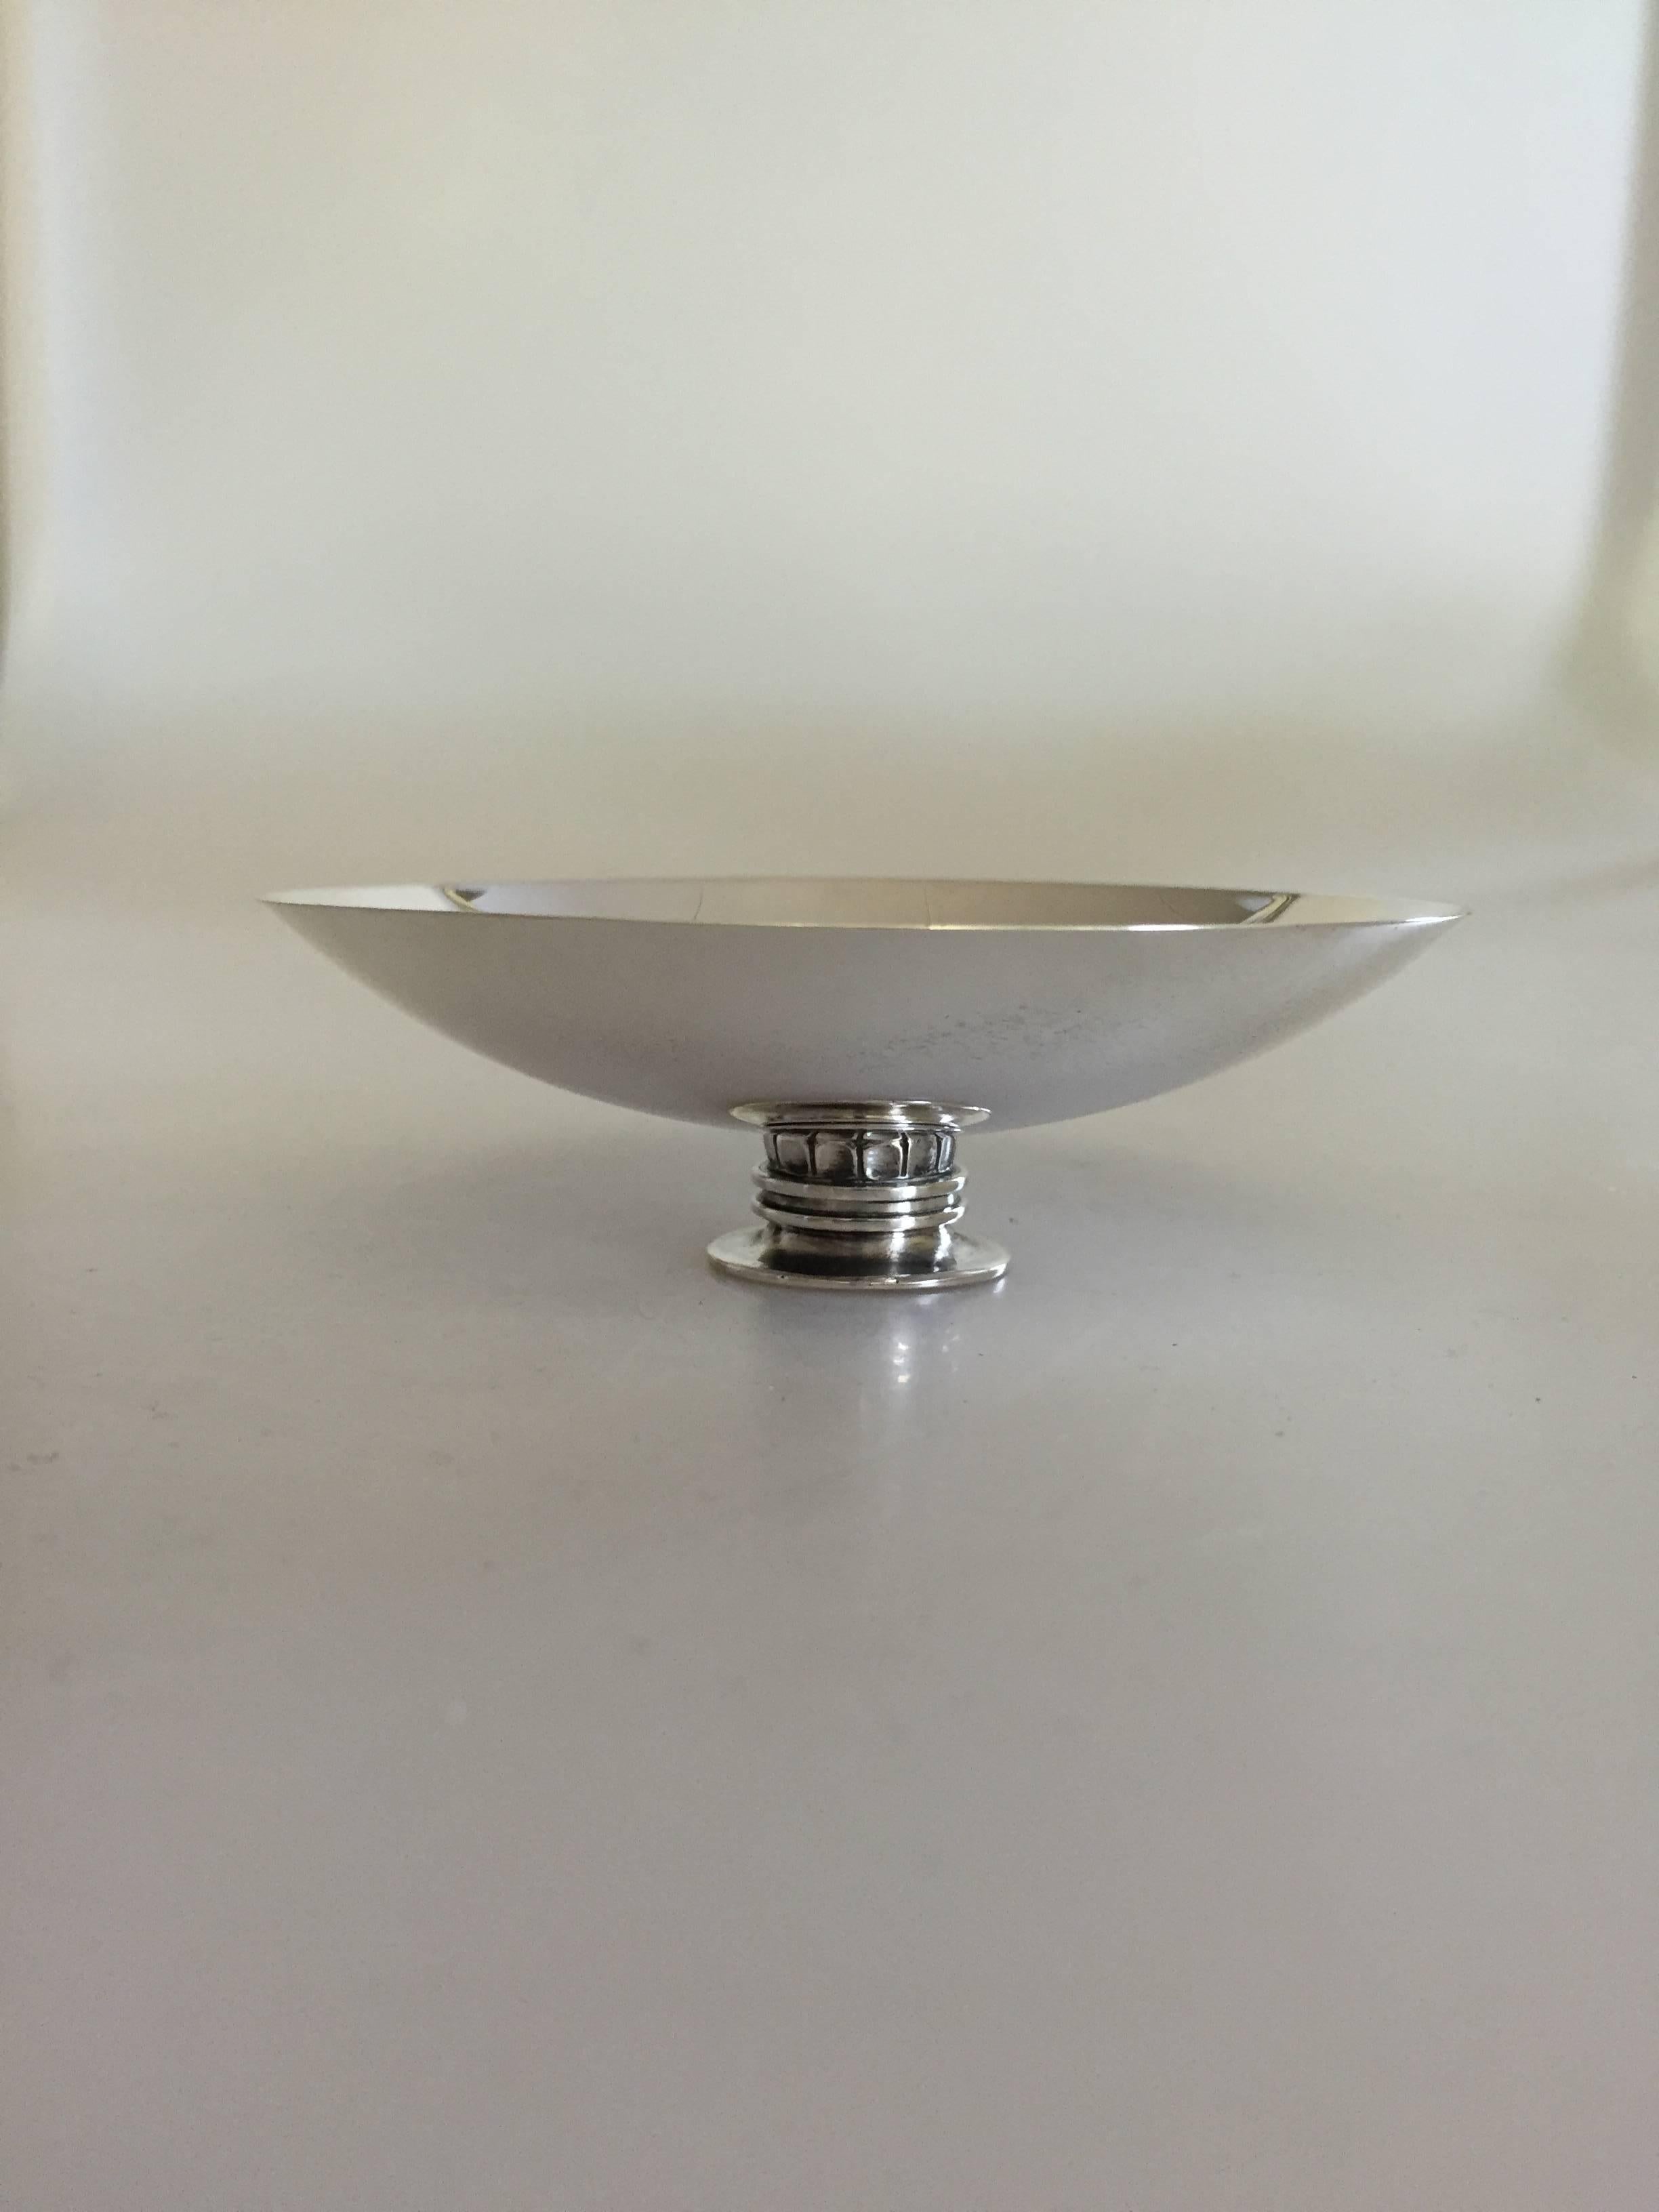 Georg Jensen sterling silver bowl/ashtray #845, from 1930-1945. 

Designed by Sigvard Bernadotte.

Weighs 110 g/3.05 oz.
Measures: 3.5 cm H, 10.1 cm diameter.